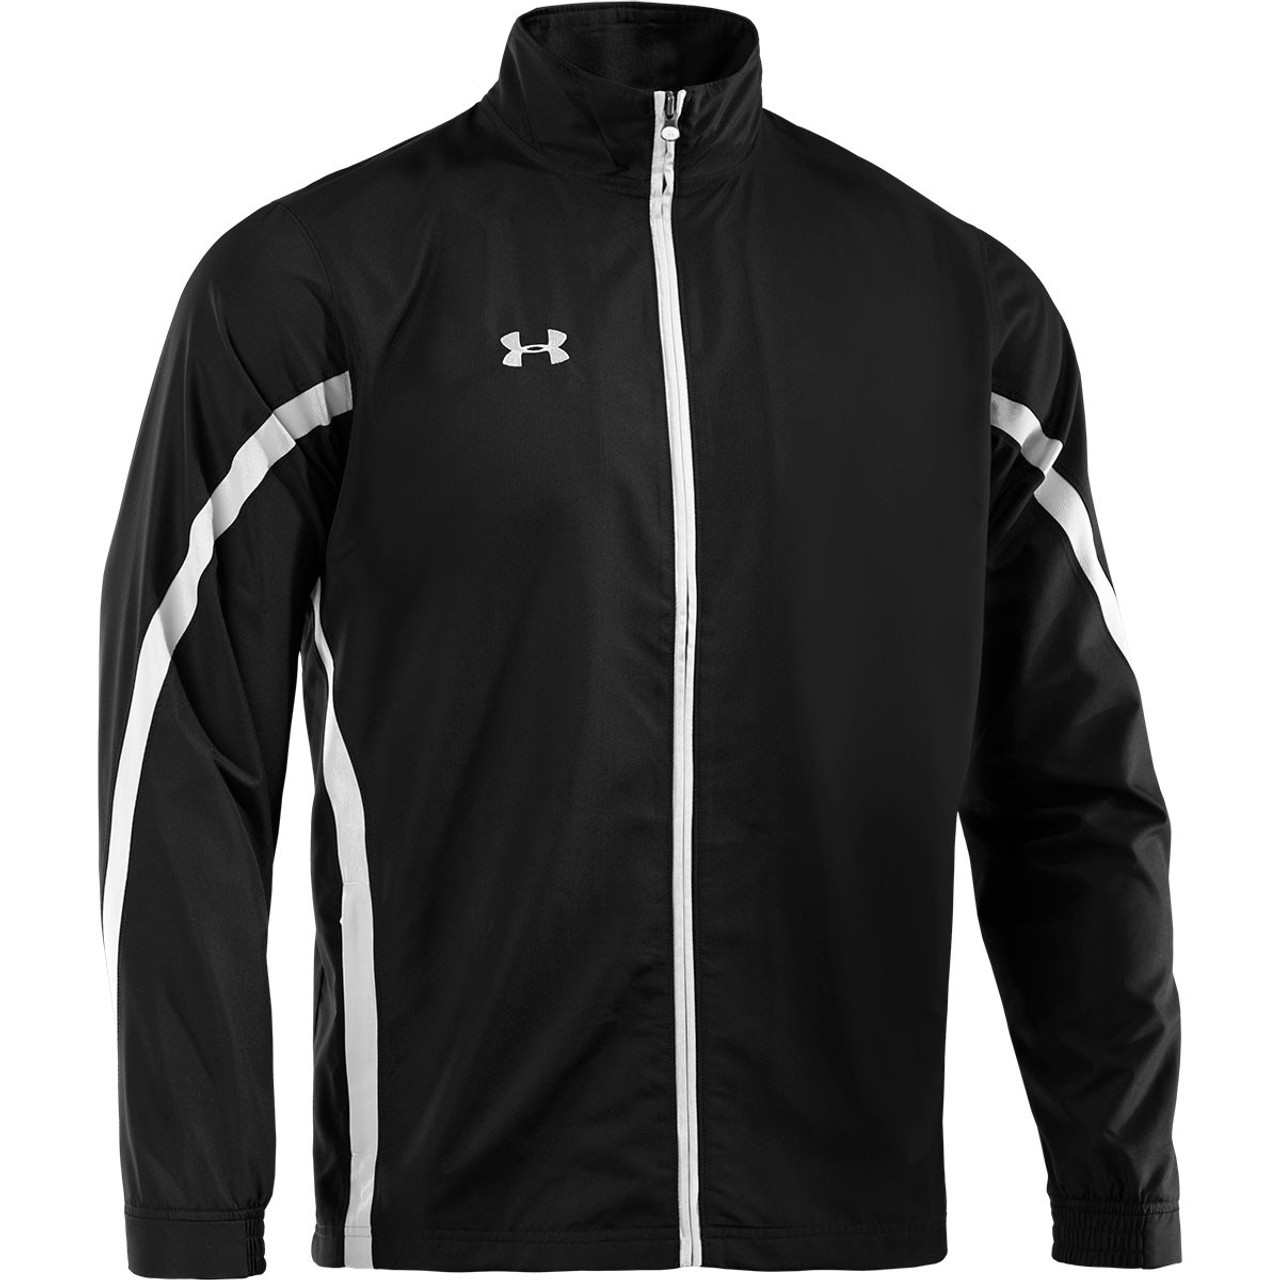 where to purchase under armour clothing